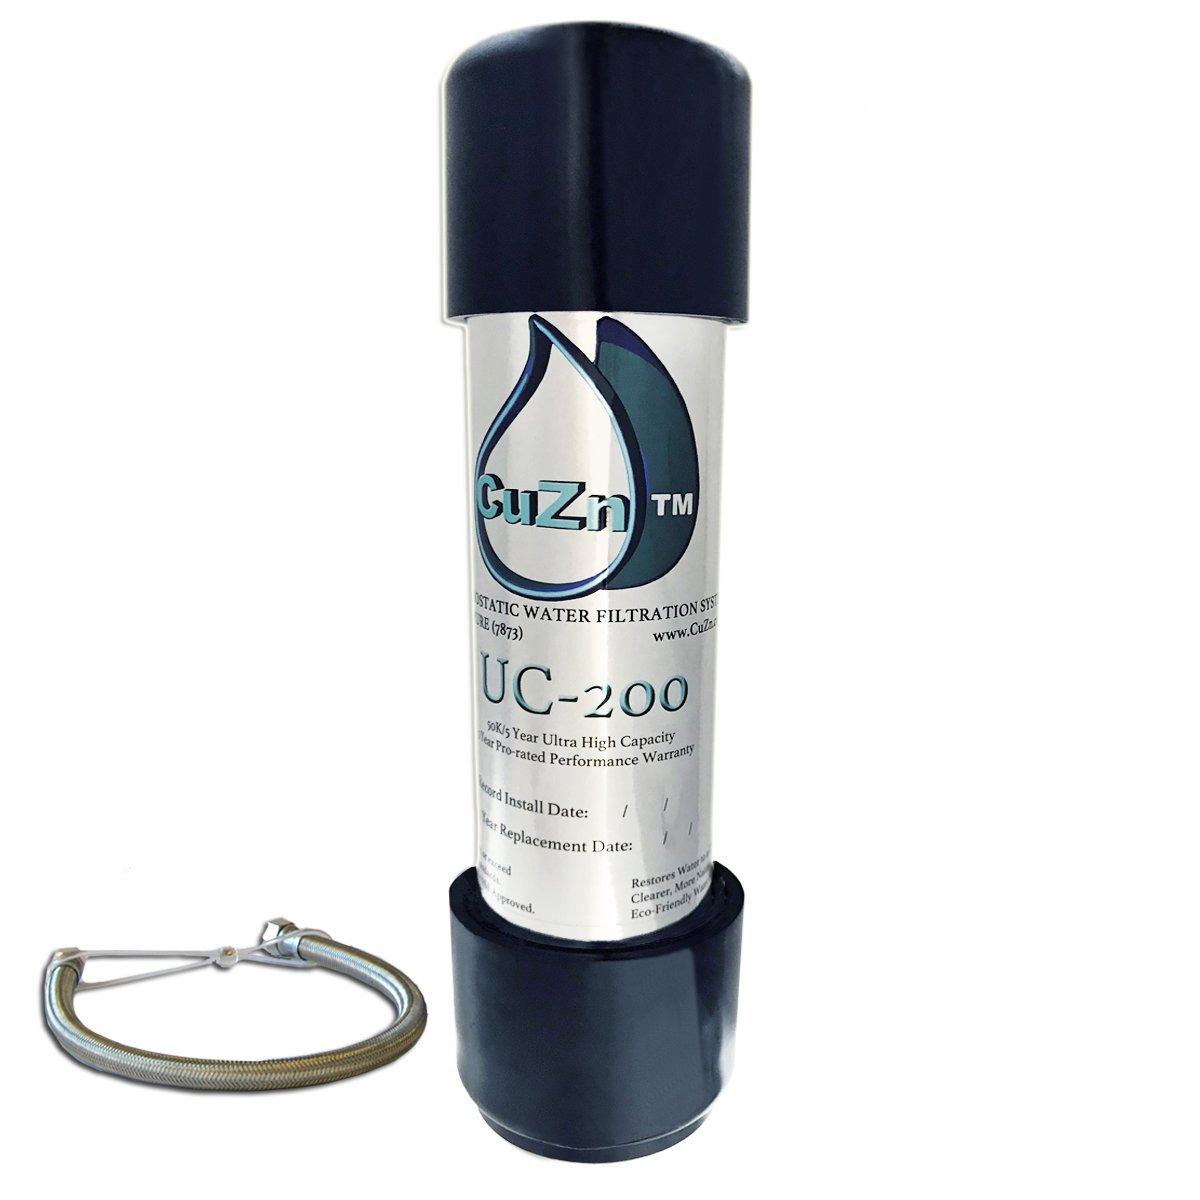 Cuzn uc 200 under counter water filter